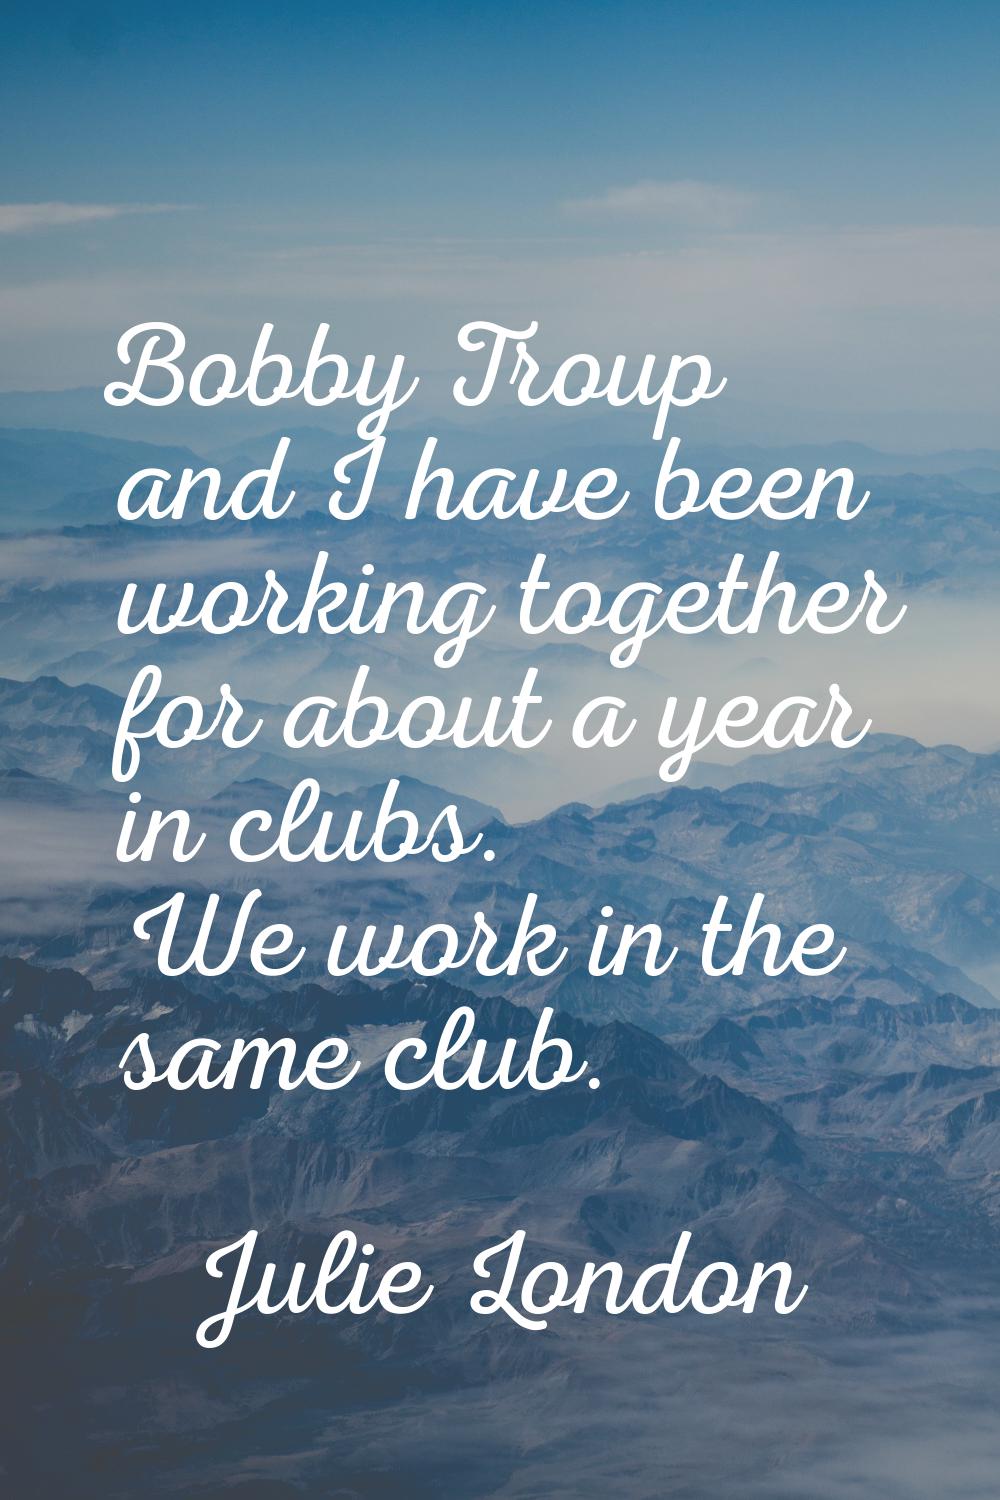 Bobby Troup and I have been working together for about a year in clubs. We work in the same club.